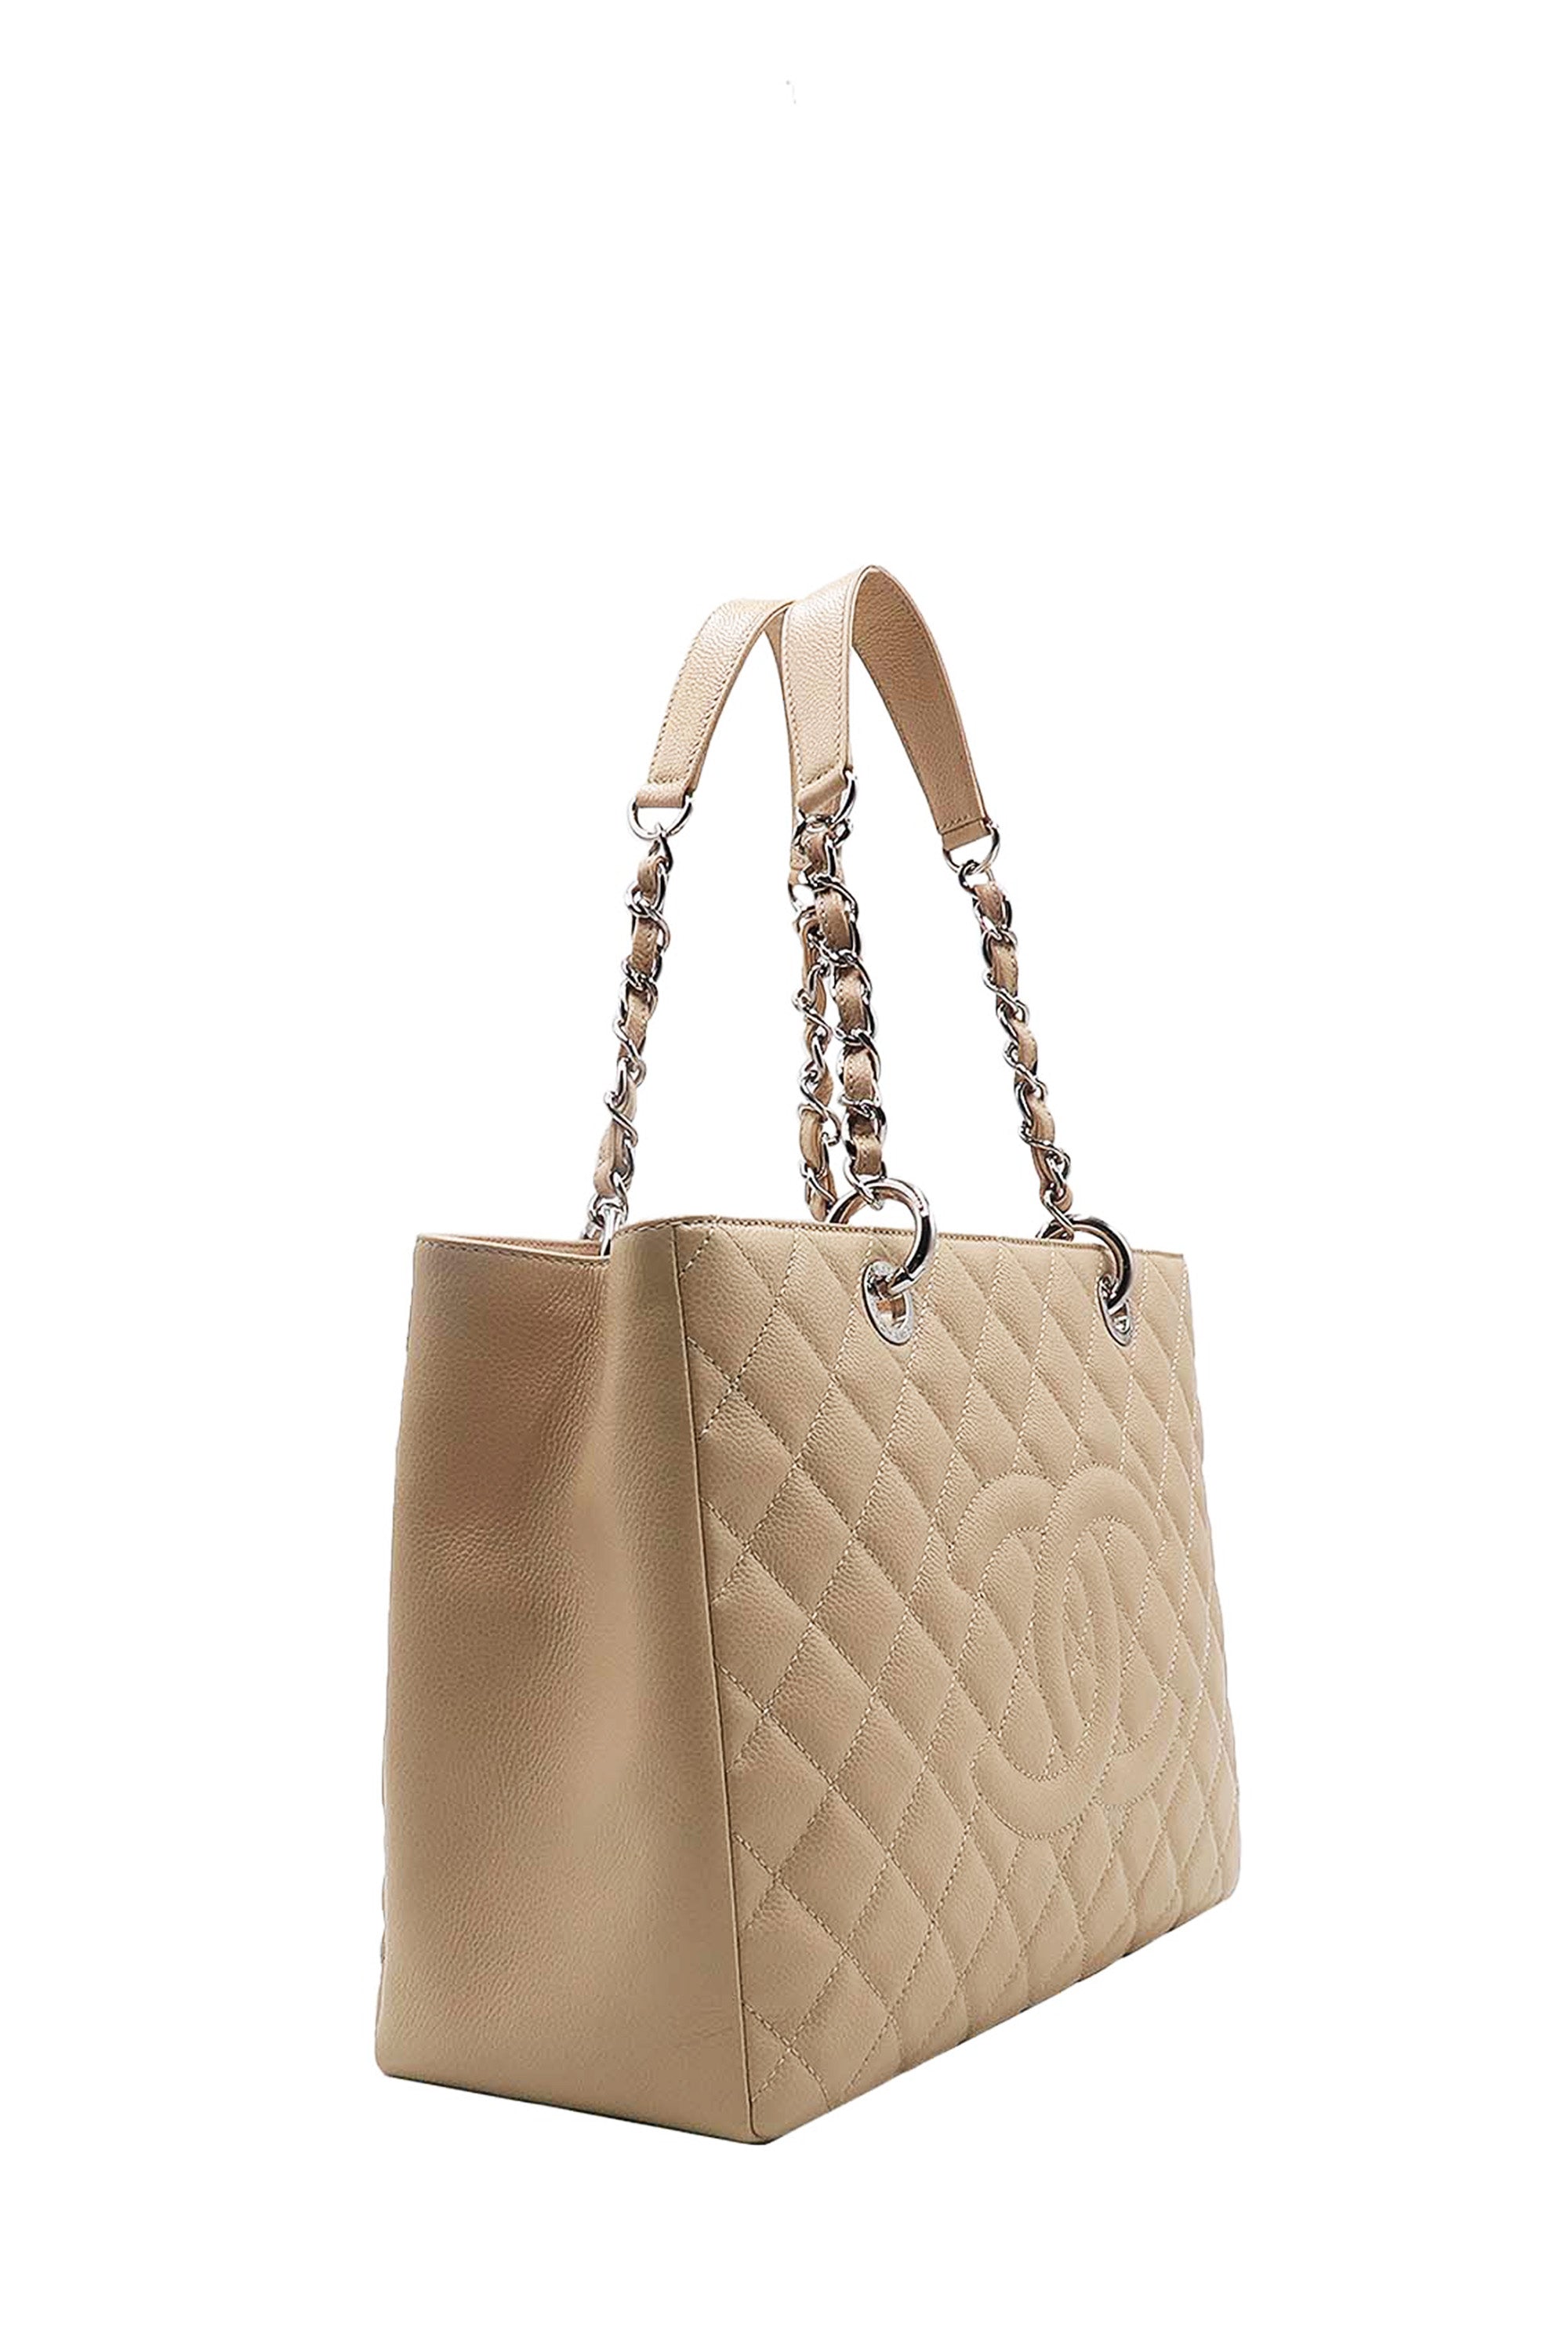 Chanel Beige GST Grand Shopping Tote Bag – The Closet